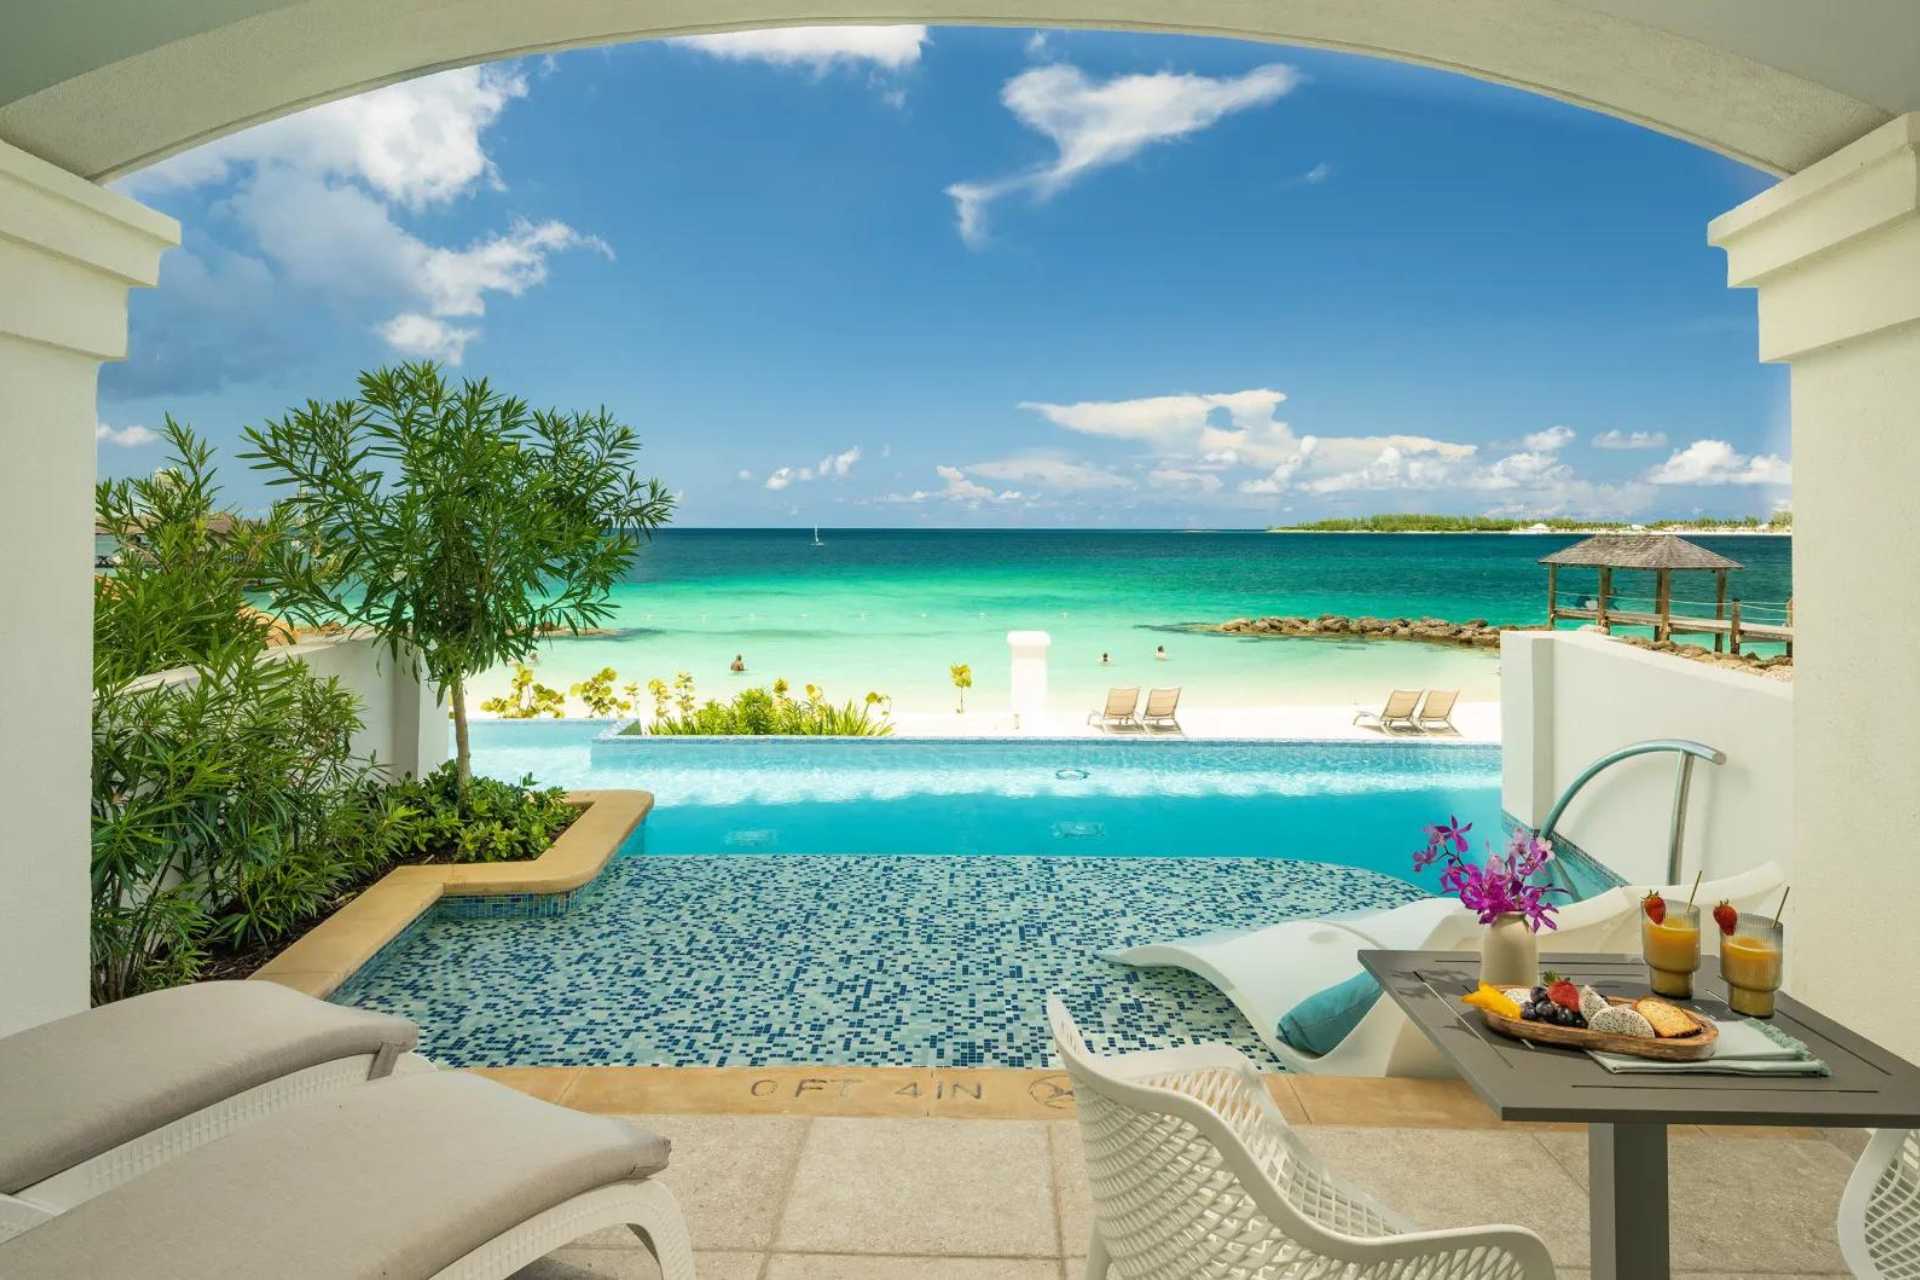 View from a room at the Sandals Royal-Bahamian ©Sandals